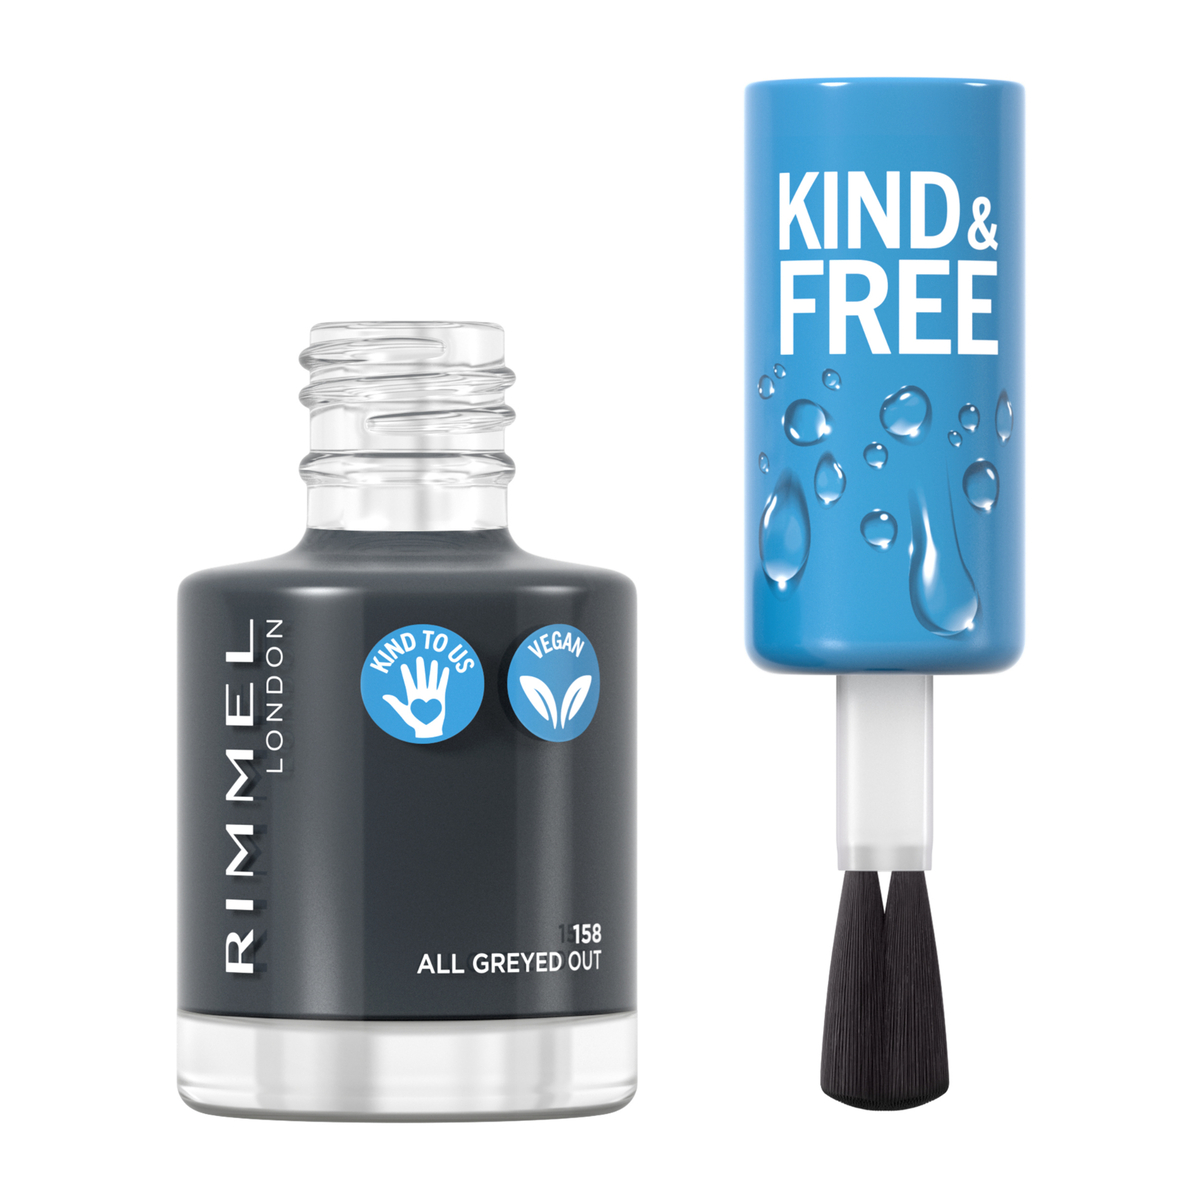 Rimmel London Kind & Free Clean Nail Polish, 158 All Greyed Out, 8 ml